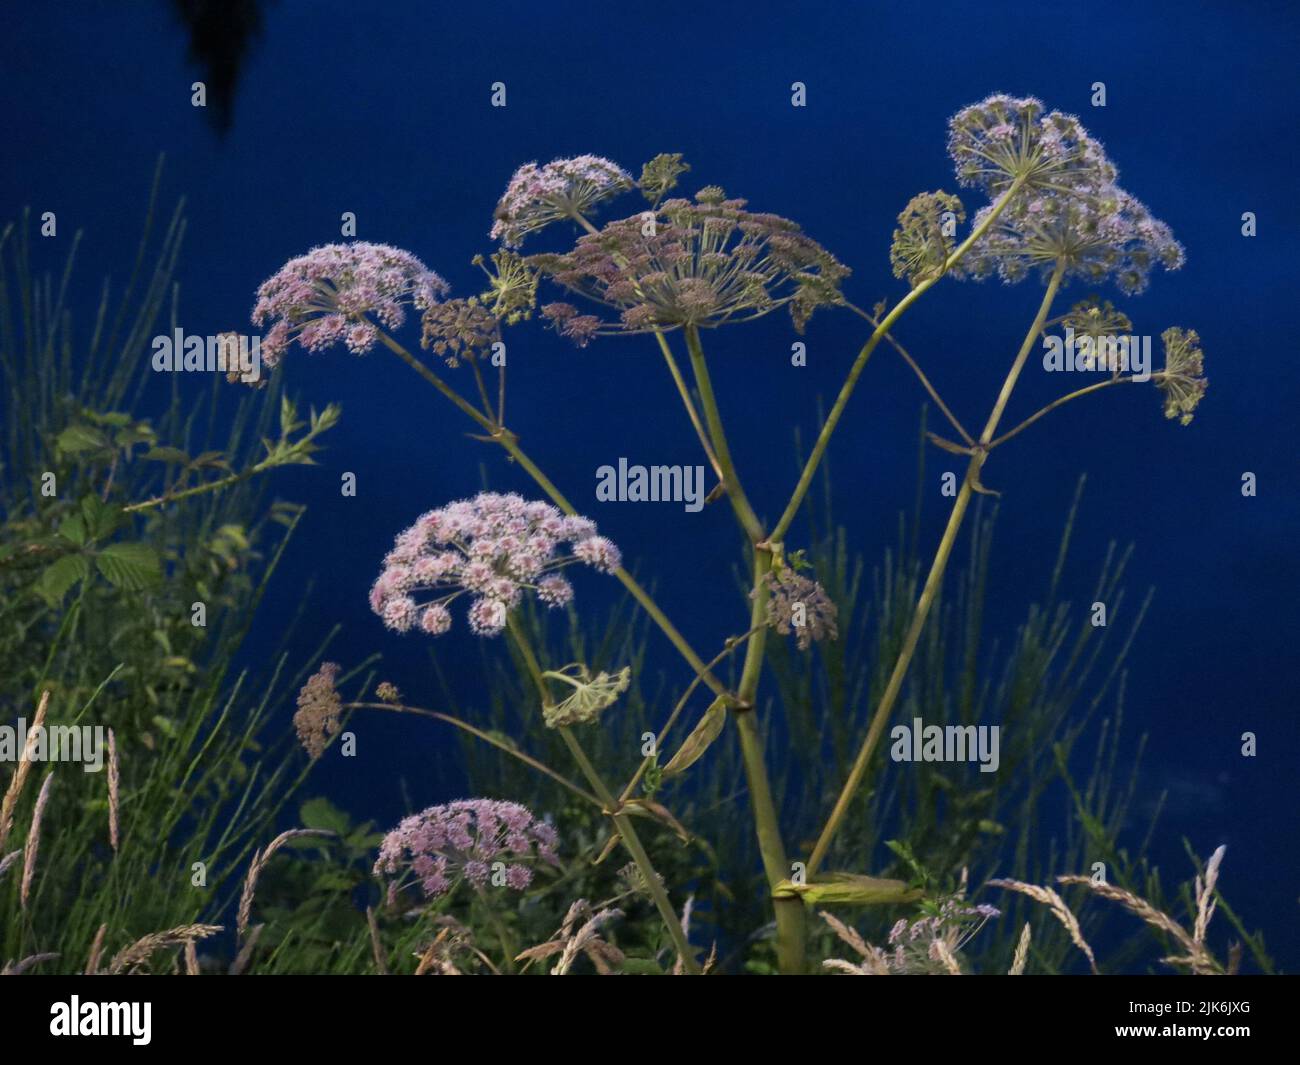 Umbellifer at twilight: statuesque flowerheads of wild angelica growing at the water's edge and shining white against deep blue water at night Stock Photo